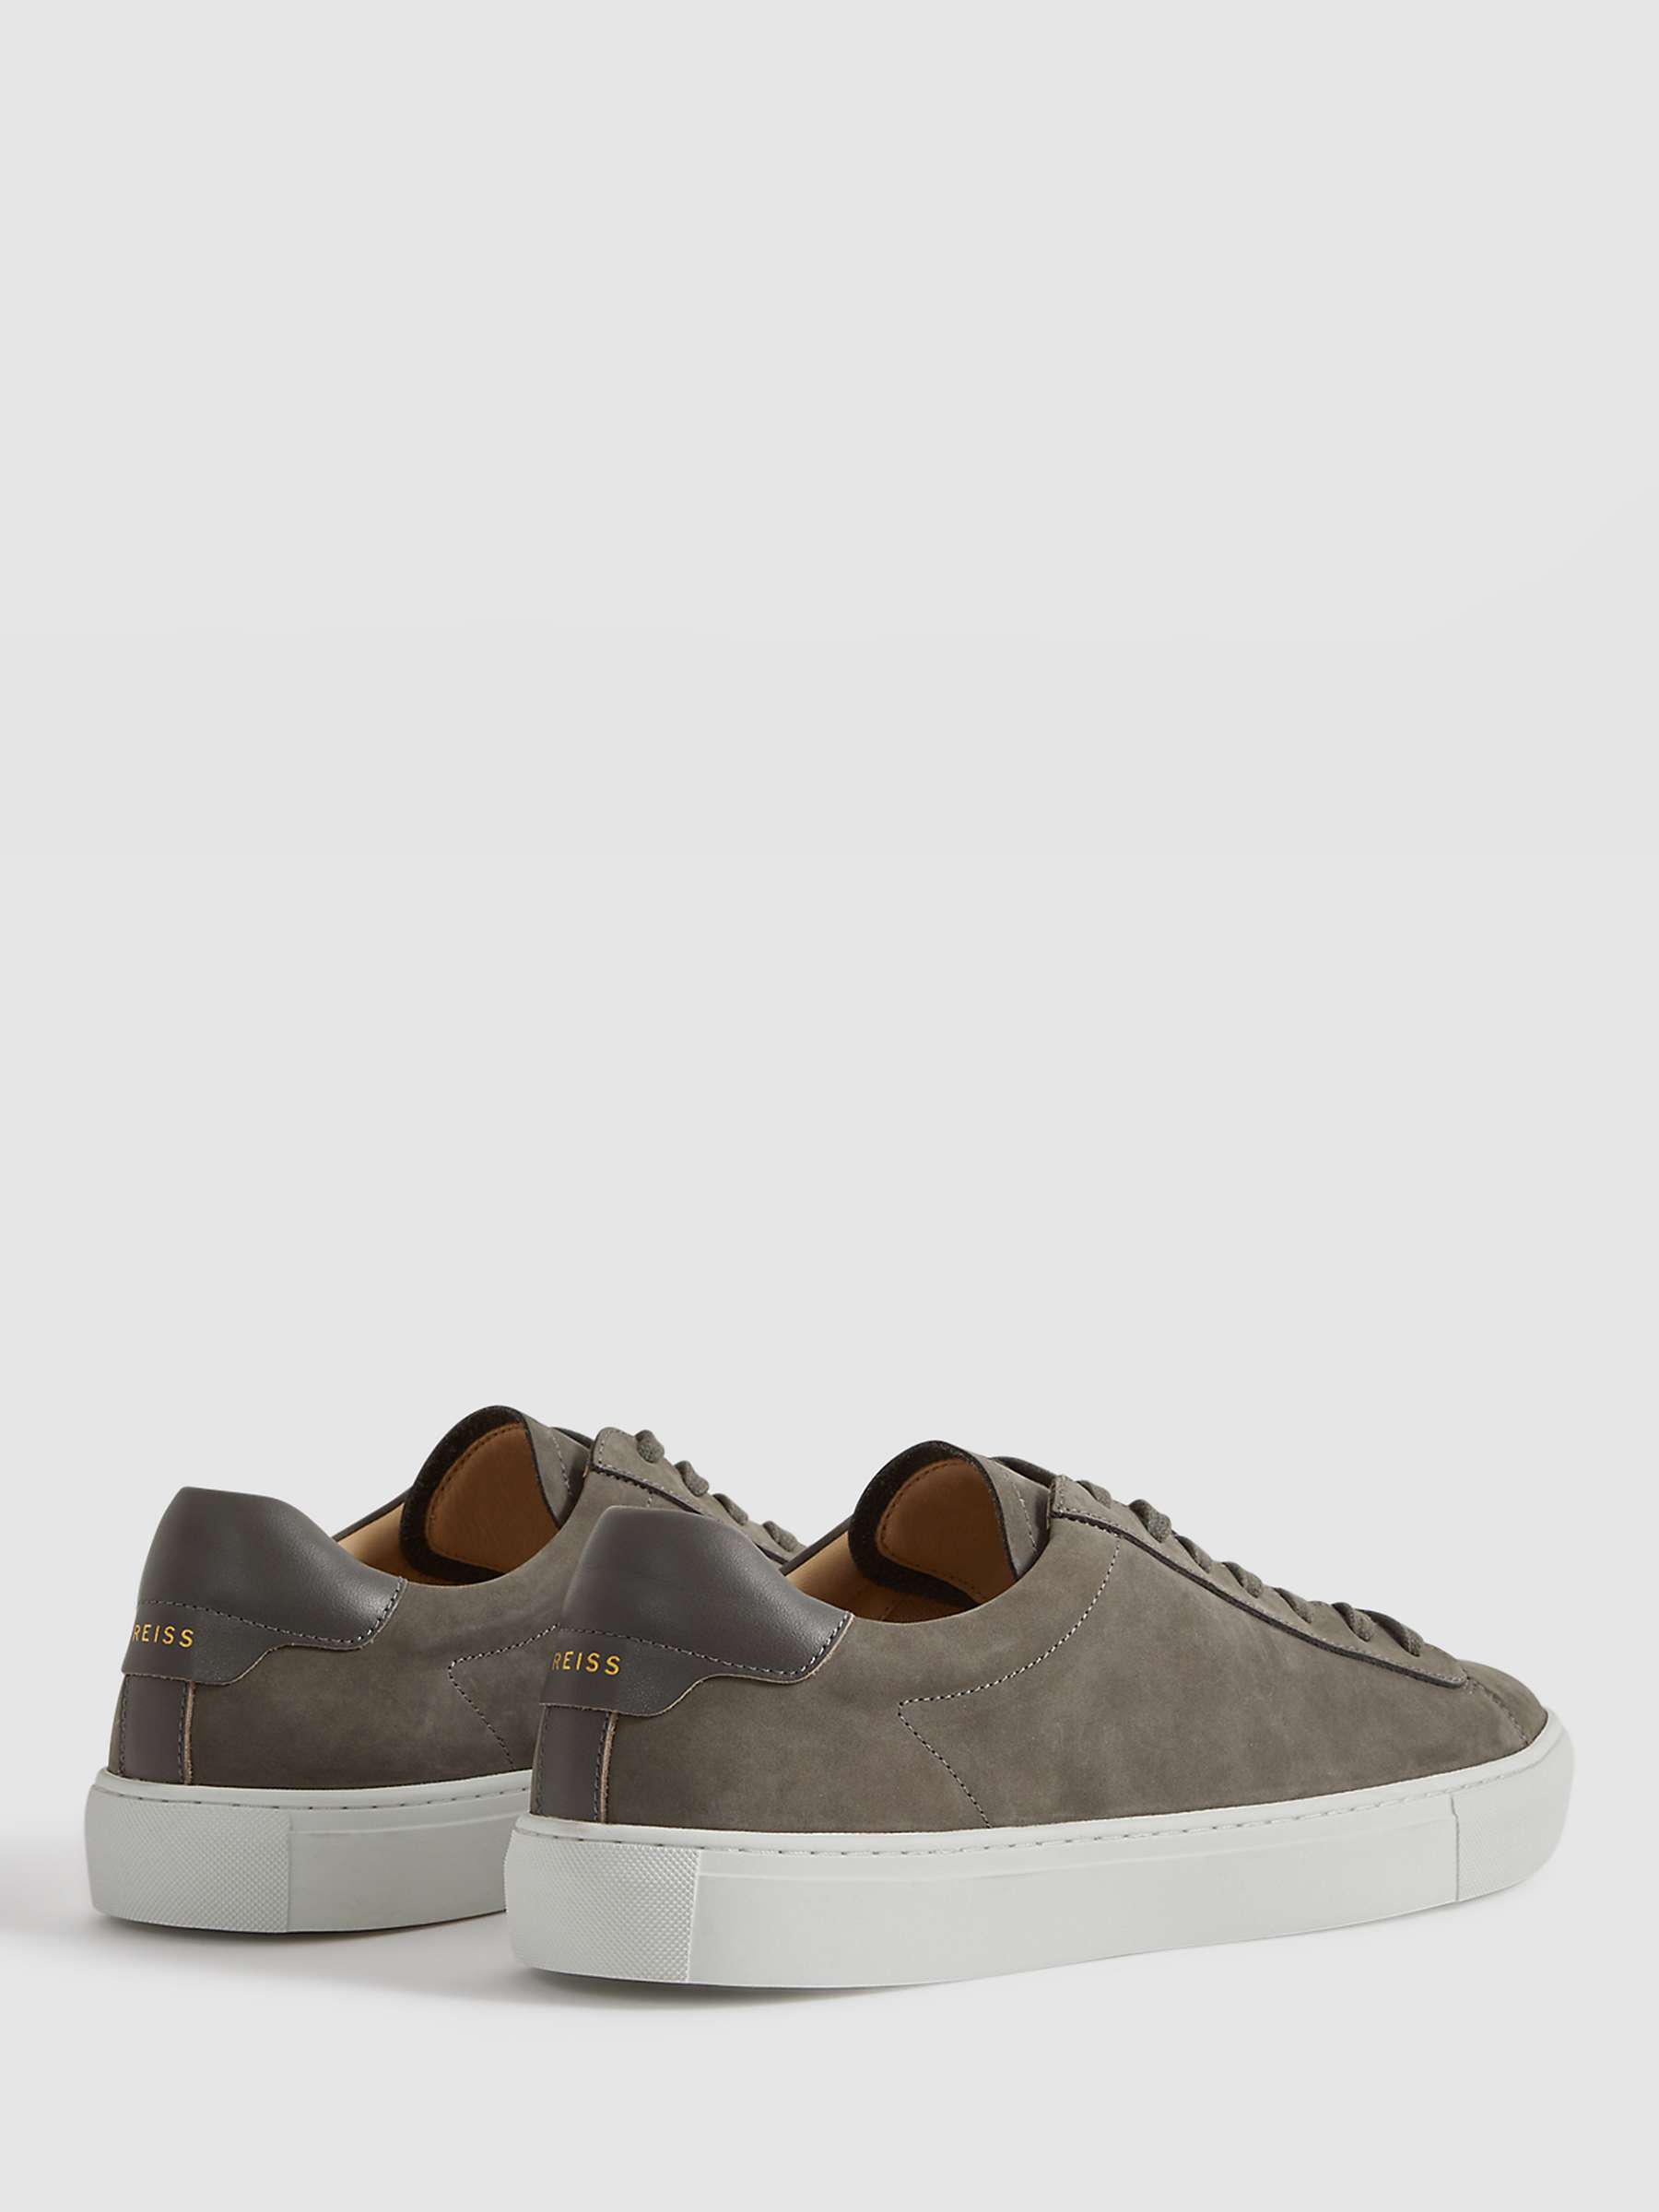 Buy Reiss Finley Leather Trainers Online at johnlewis.com